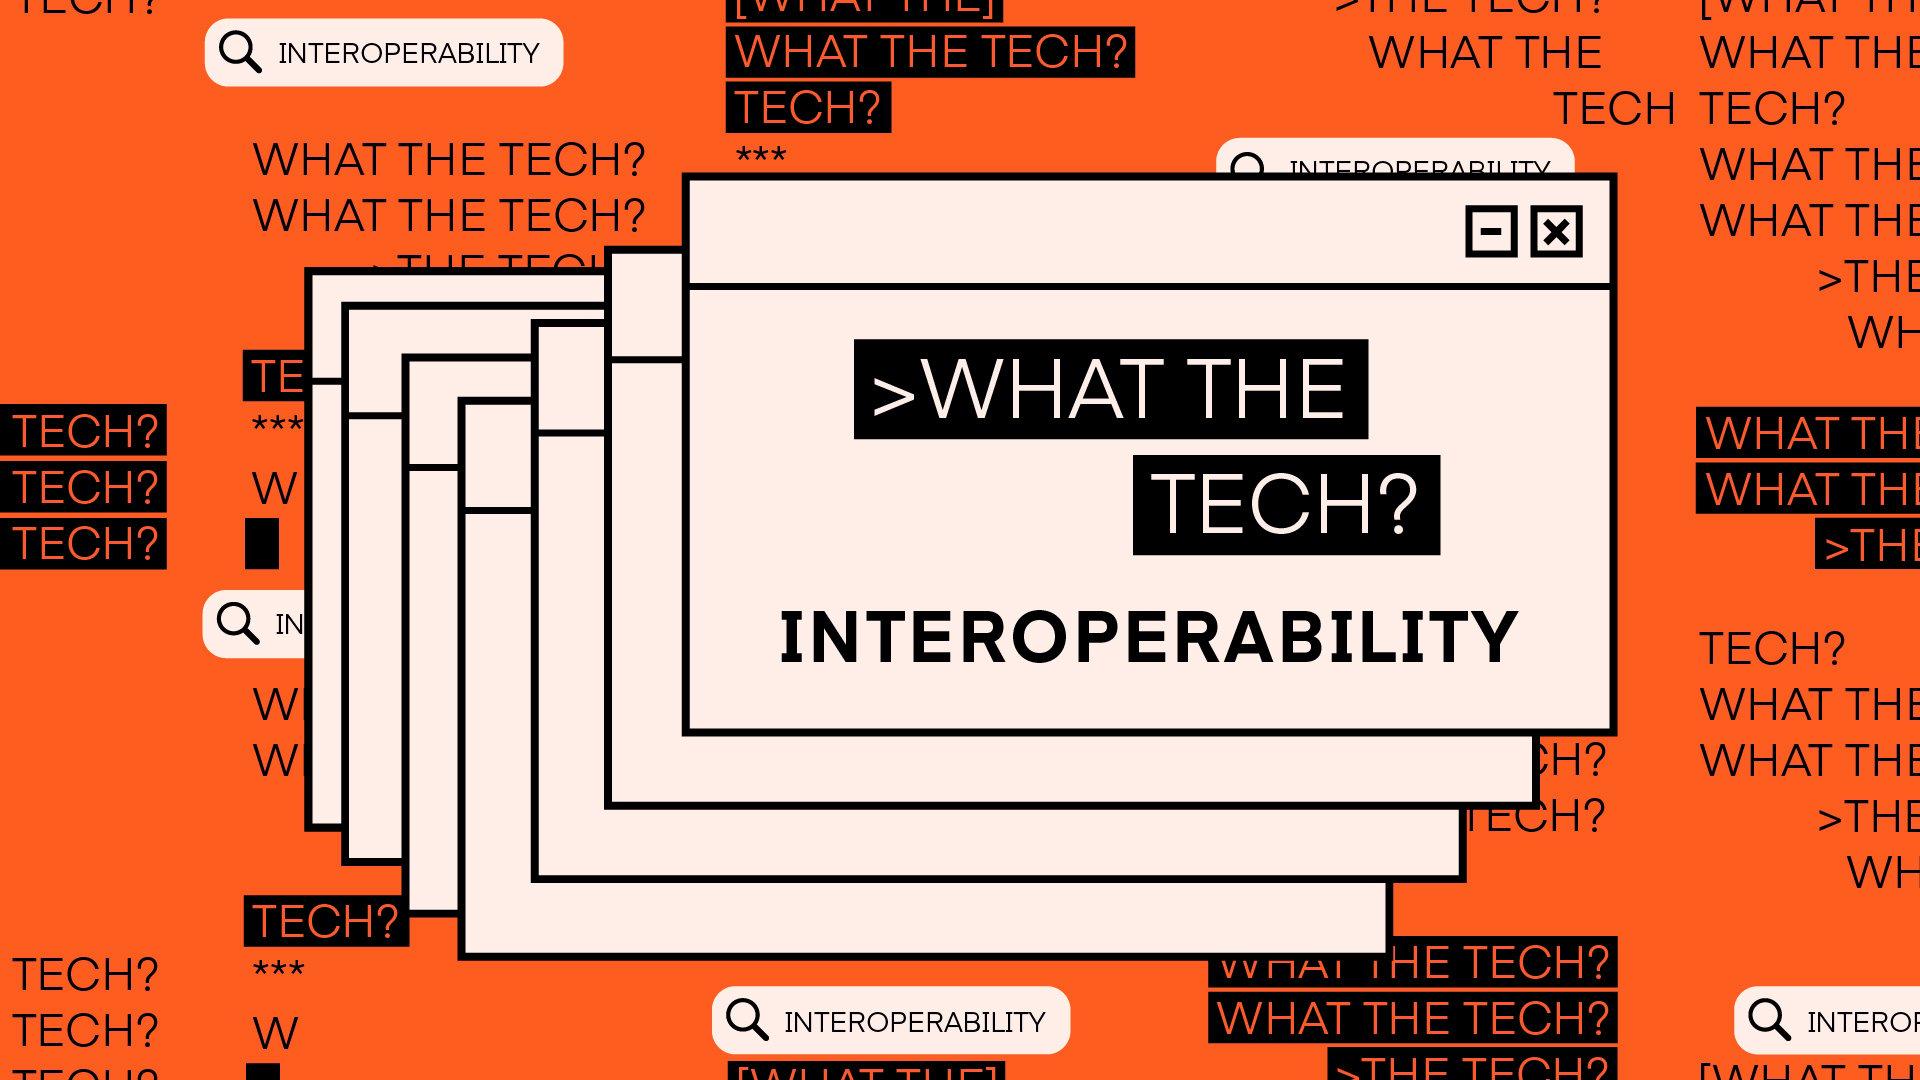 What the Tech is interoperability?